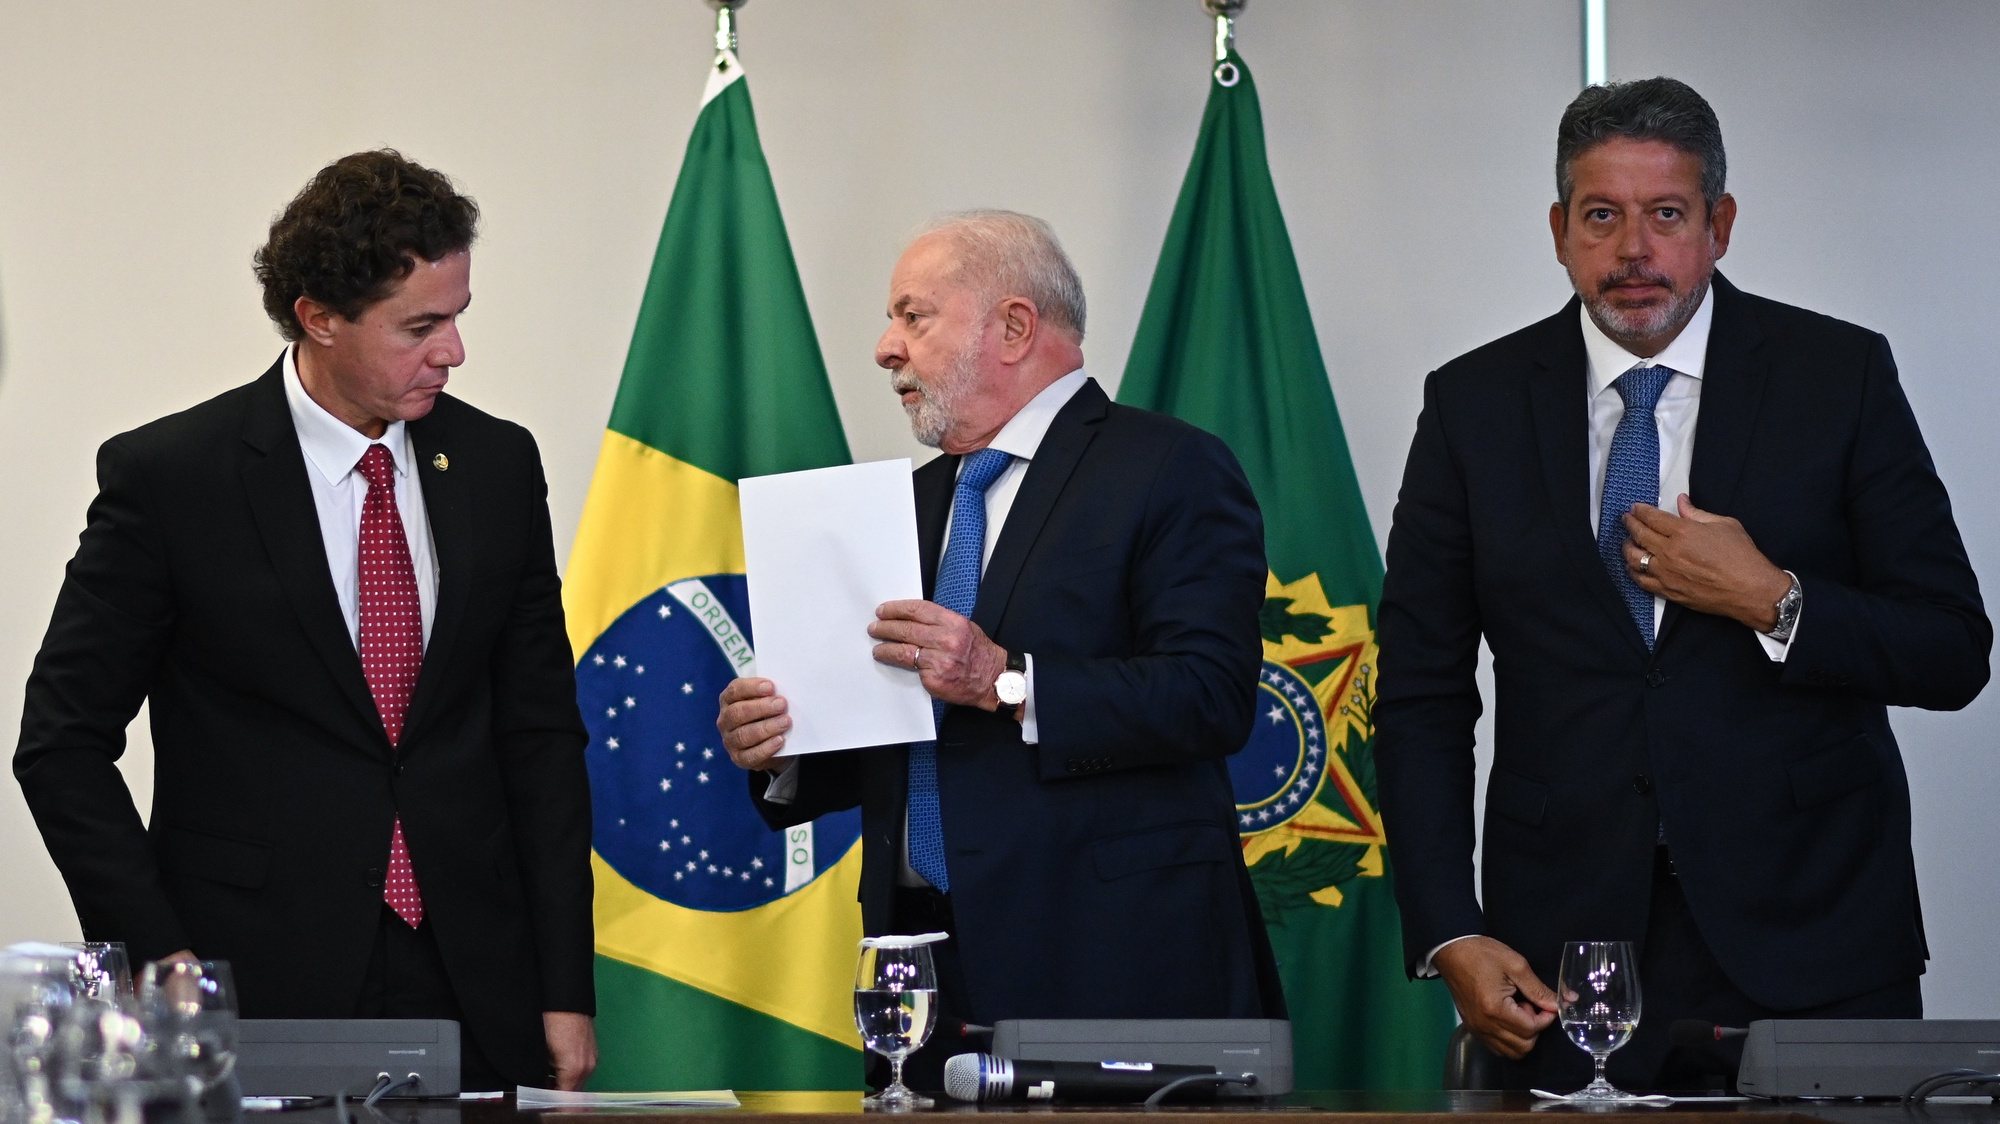 epa10400377 Brazilian President Luiz Inacio Lula da Silva (C), Vice President of the Senate,Veneziano Vital do Rego (L) and President of the Chamber of Deputies Arthur Lira (R) attend a meeting to hand over the approval of the legislative decree of federal intervention to guarantee the security of the Federal District, at the Planalto Palace, in Brasilia, Brazil, 11 January 2023. Lula regretted that his predecessor, Jair Bolsonaro, had not yet publicly acknowledged his defeat following the October 2022 elections. Thousands of Bolsonaro supporters stormed government offices on 08 January, leading authorities to bolster security nationwide.  EPA/ANDRE BORGES